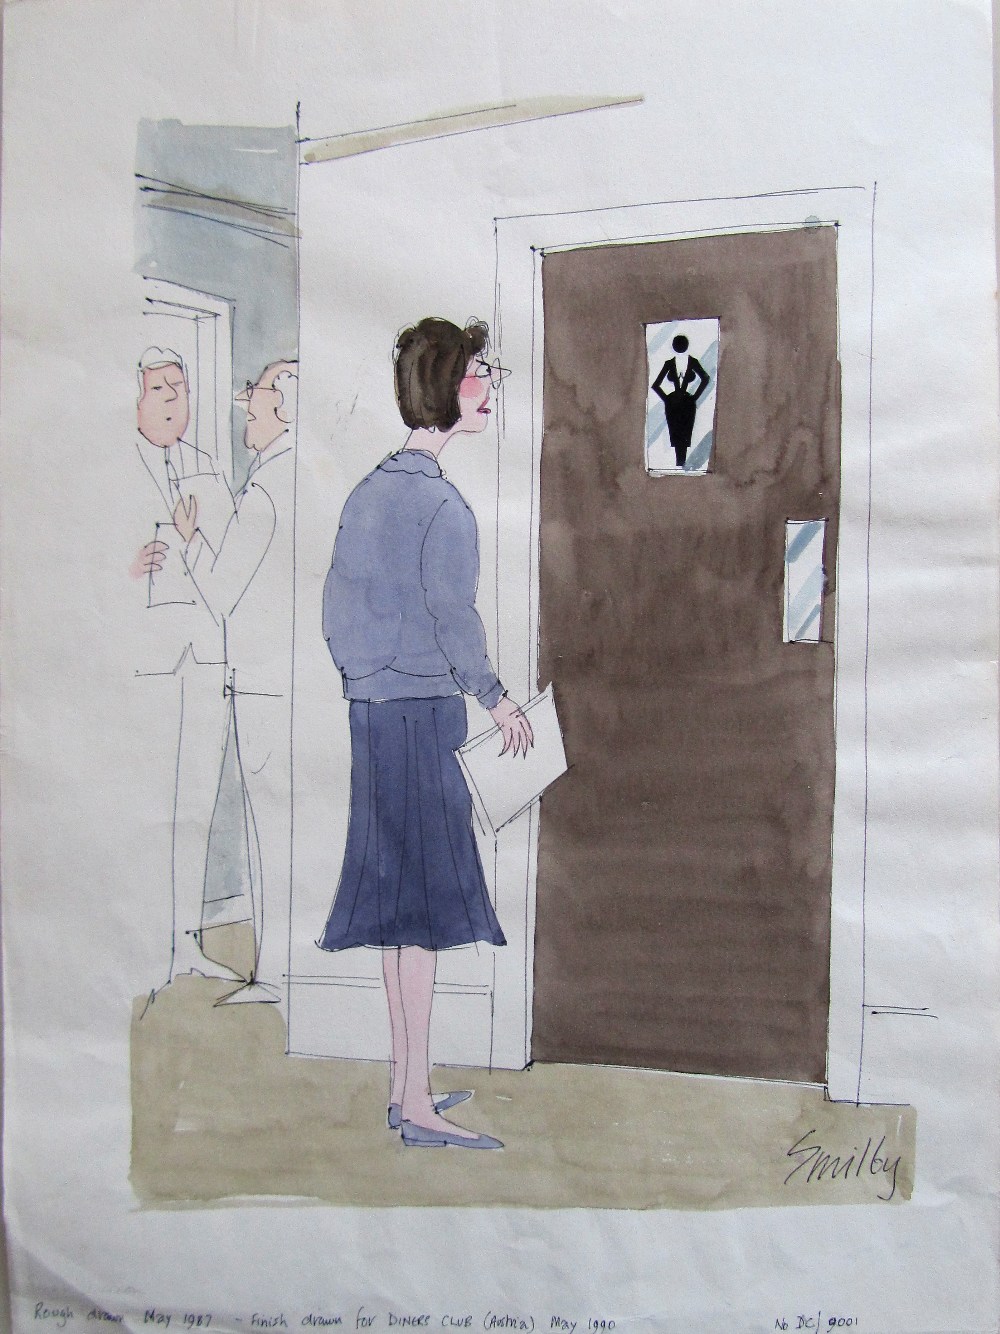 Smilby, Francis Wilford-Smith 'Feminist angry at Ladies Loo sign' - Image 2 of 2